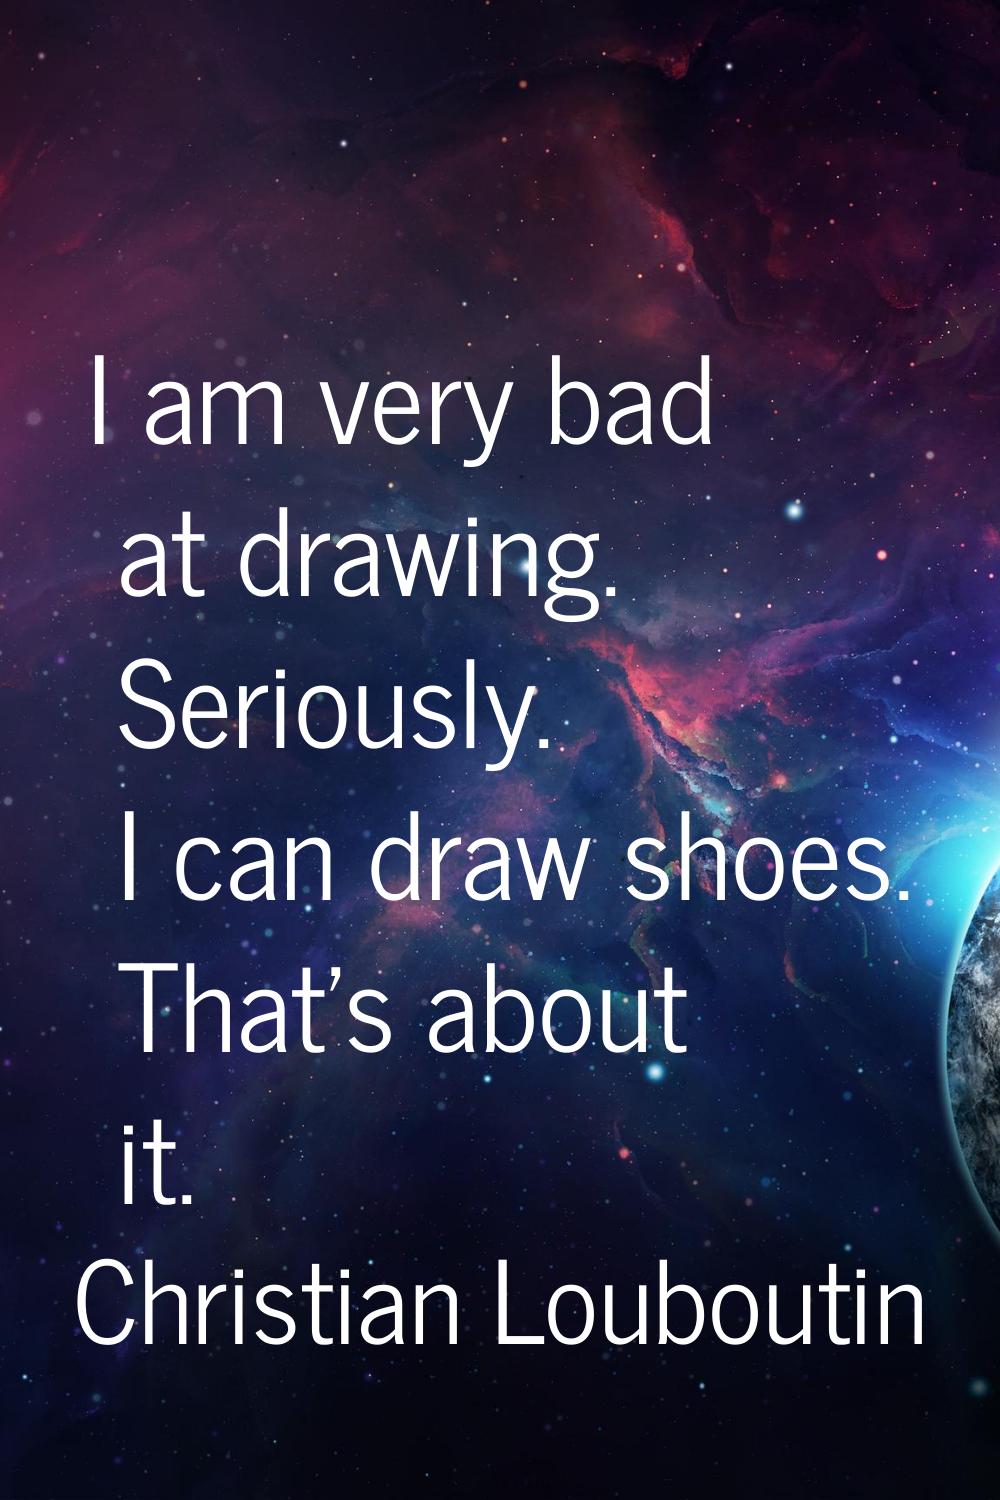 I am very bad at drawing. Seriously. I can draw shoes. That's about it.